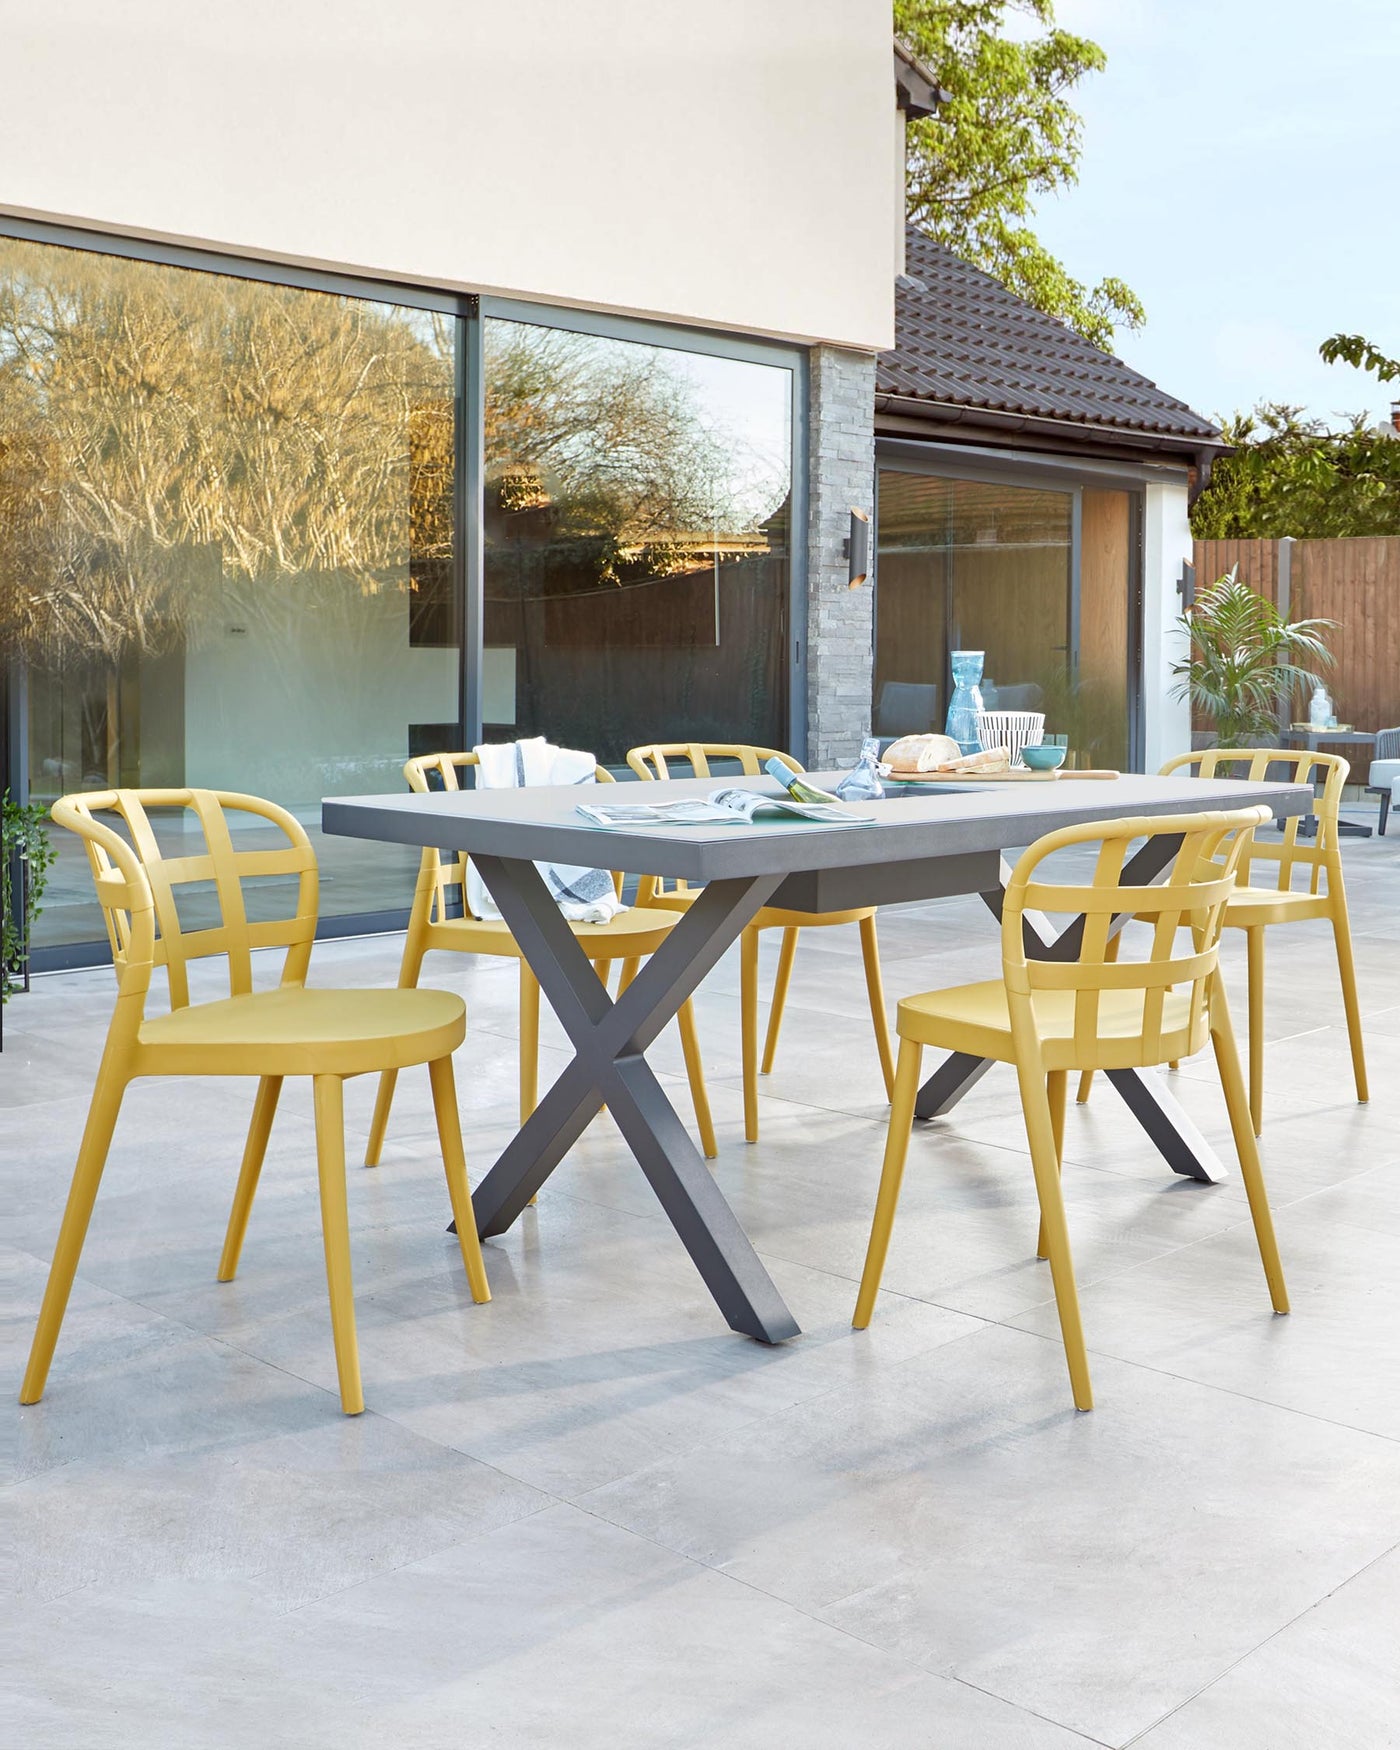 Rio Grey 4 to 6 Seater and Skye Outdoor Dining Set